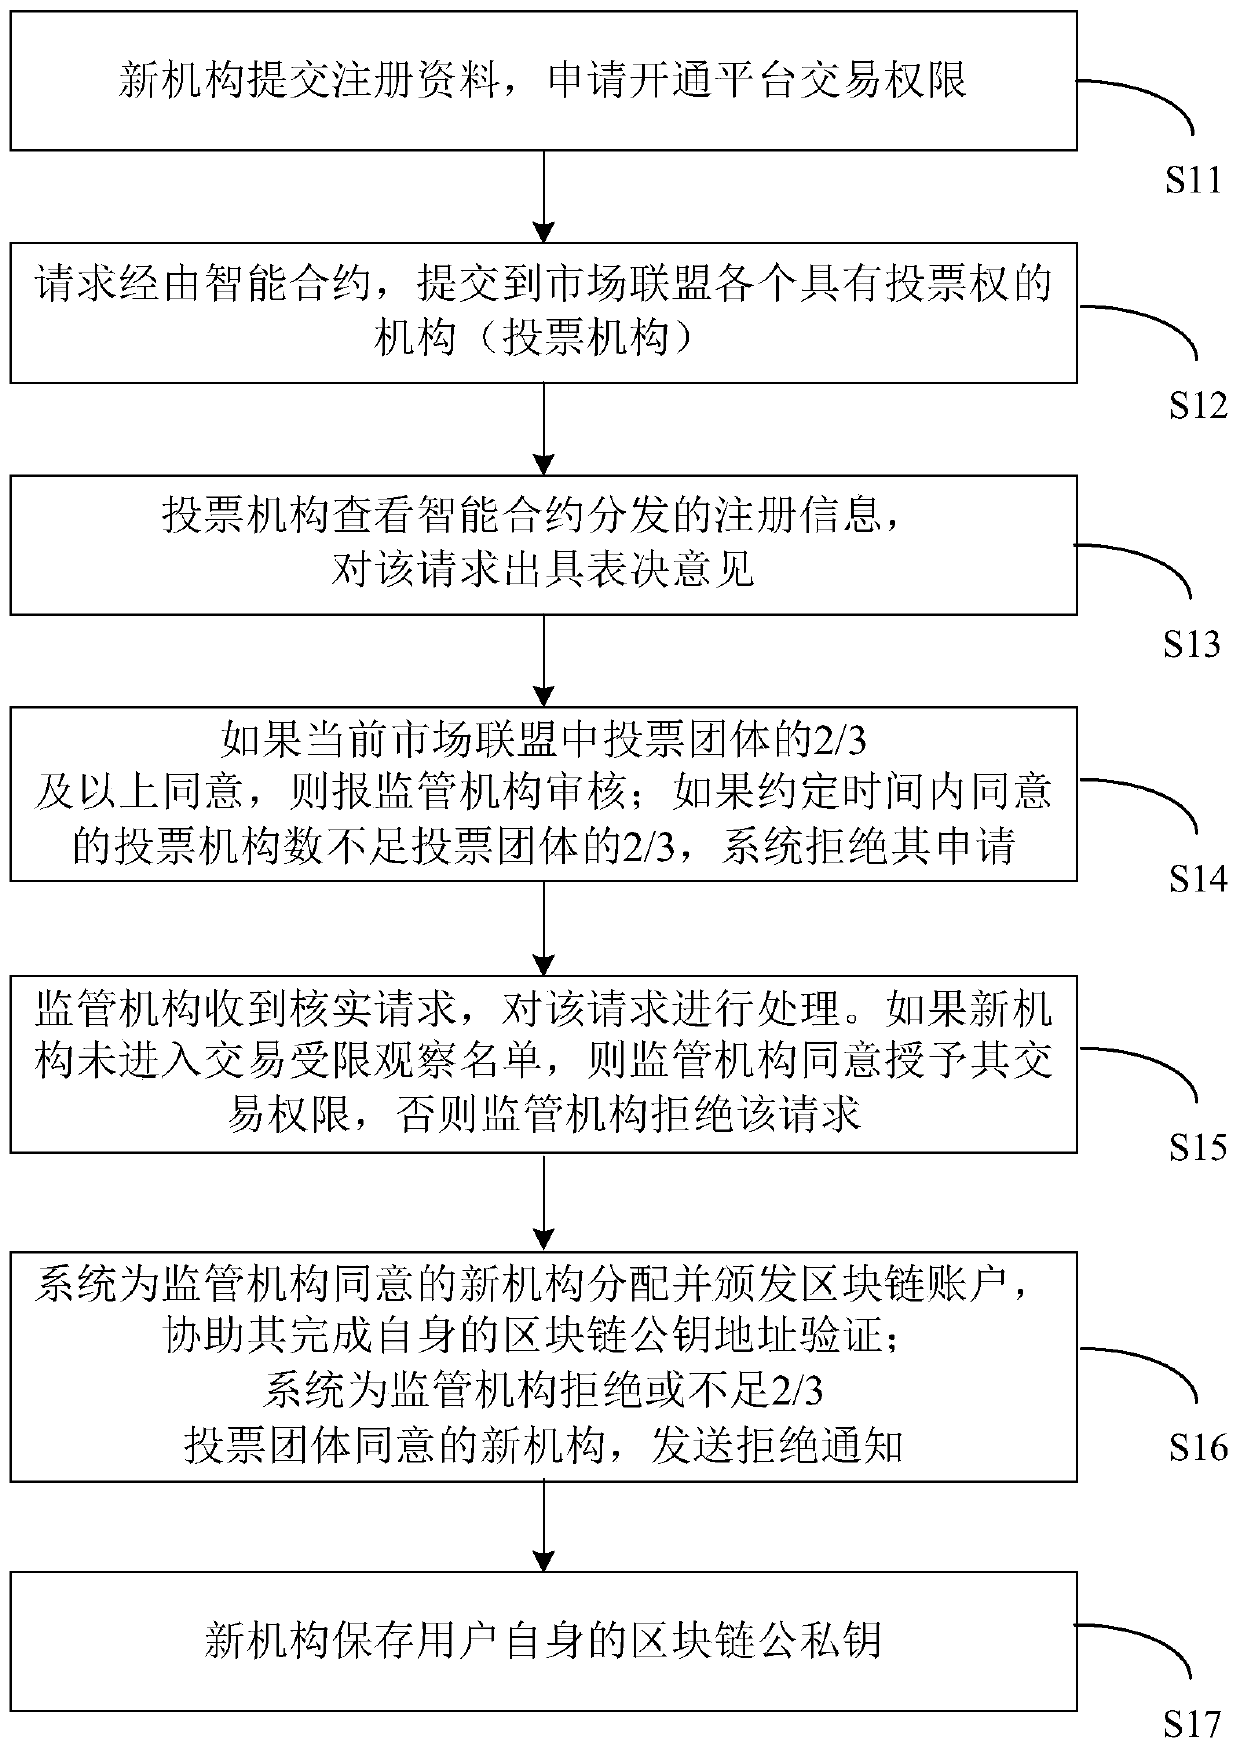 Off-site bond transaction clearing system and method based on license chain